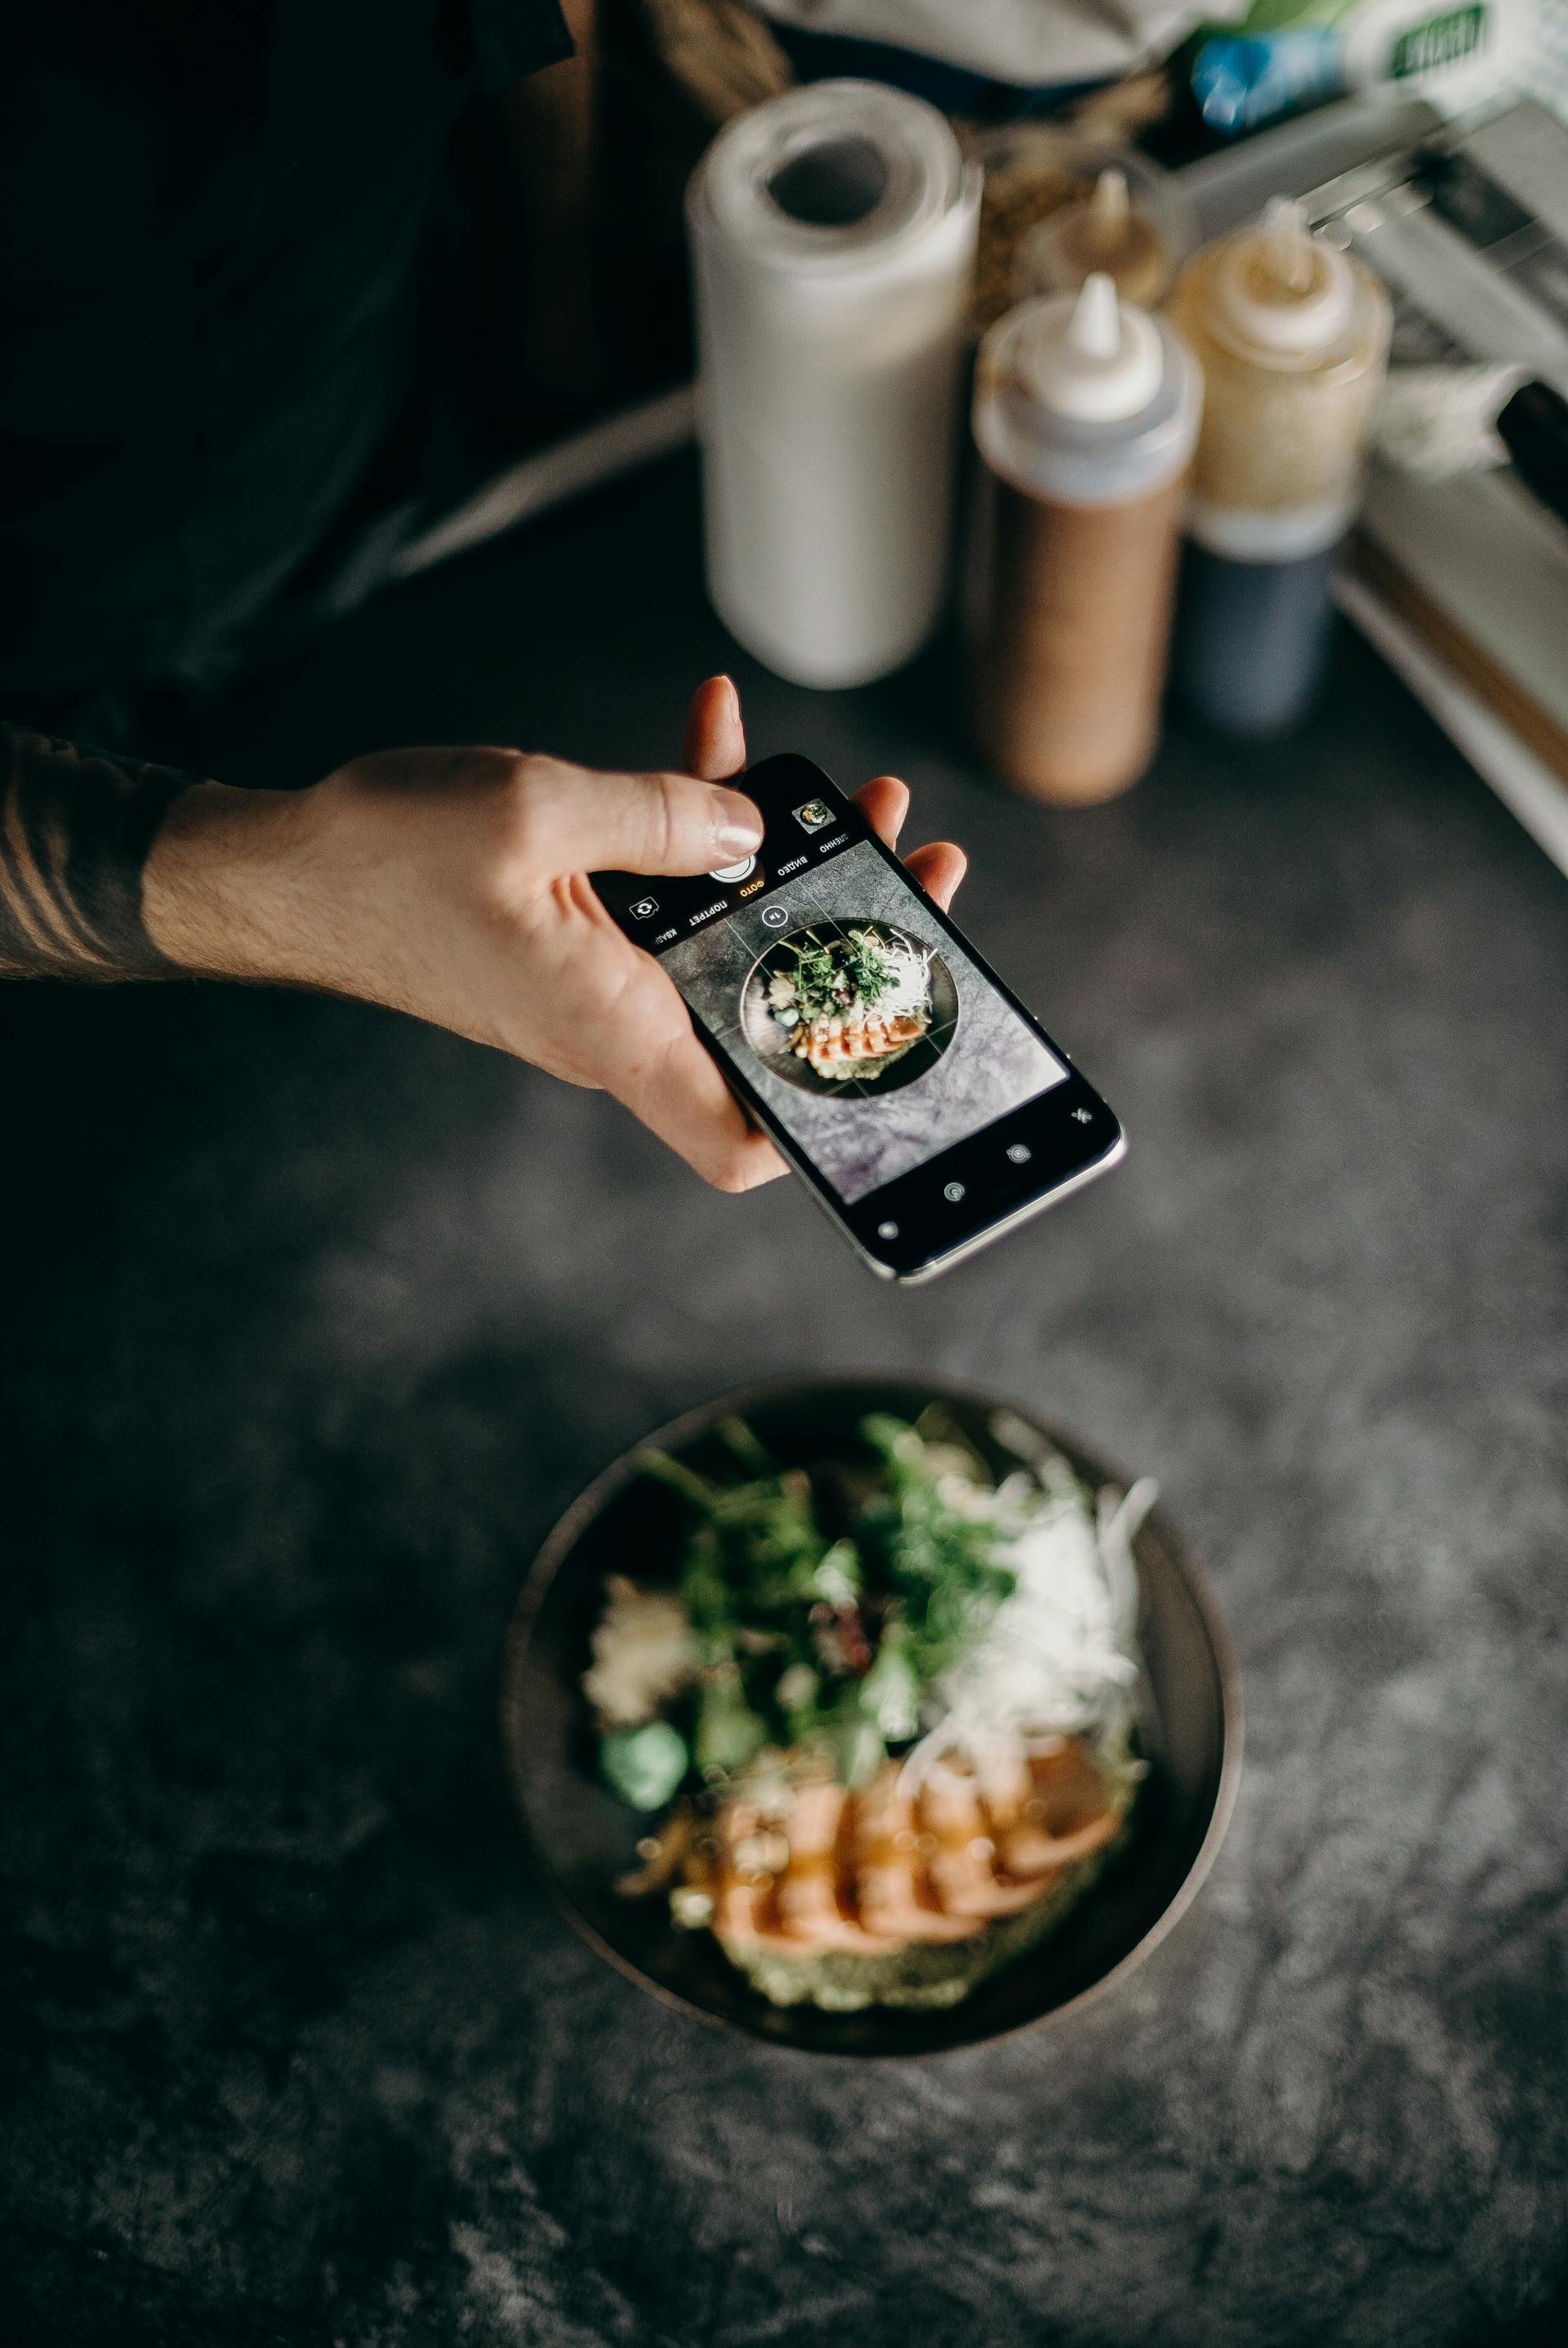 A person taking a photo of food | Source: Pexels